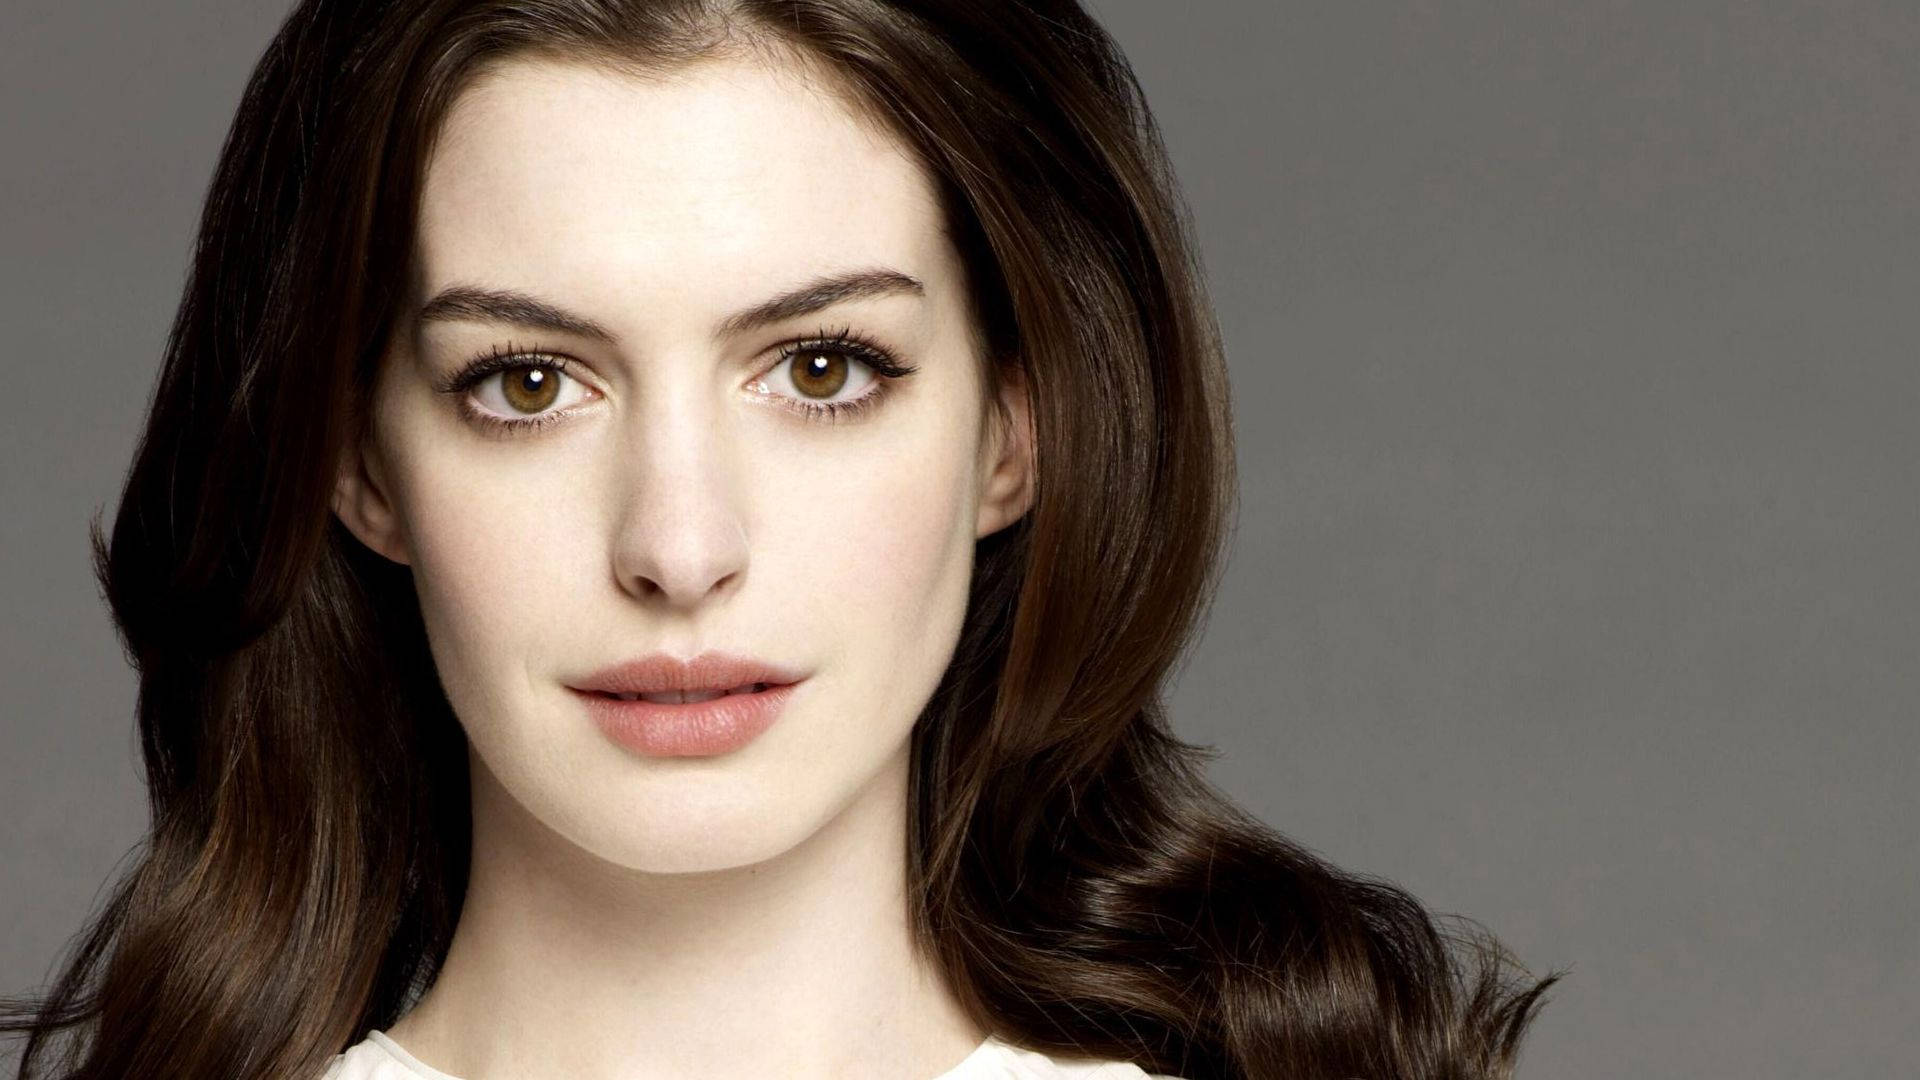 Perfect Face Anne Hathaway Wallpaper